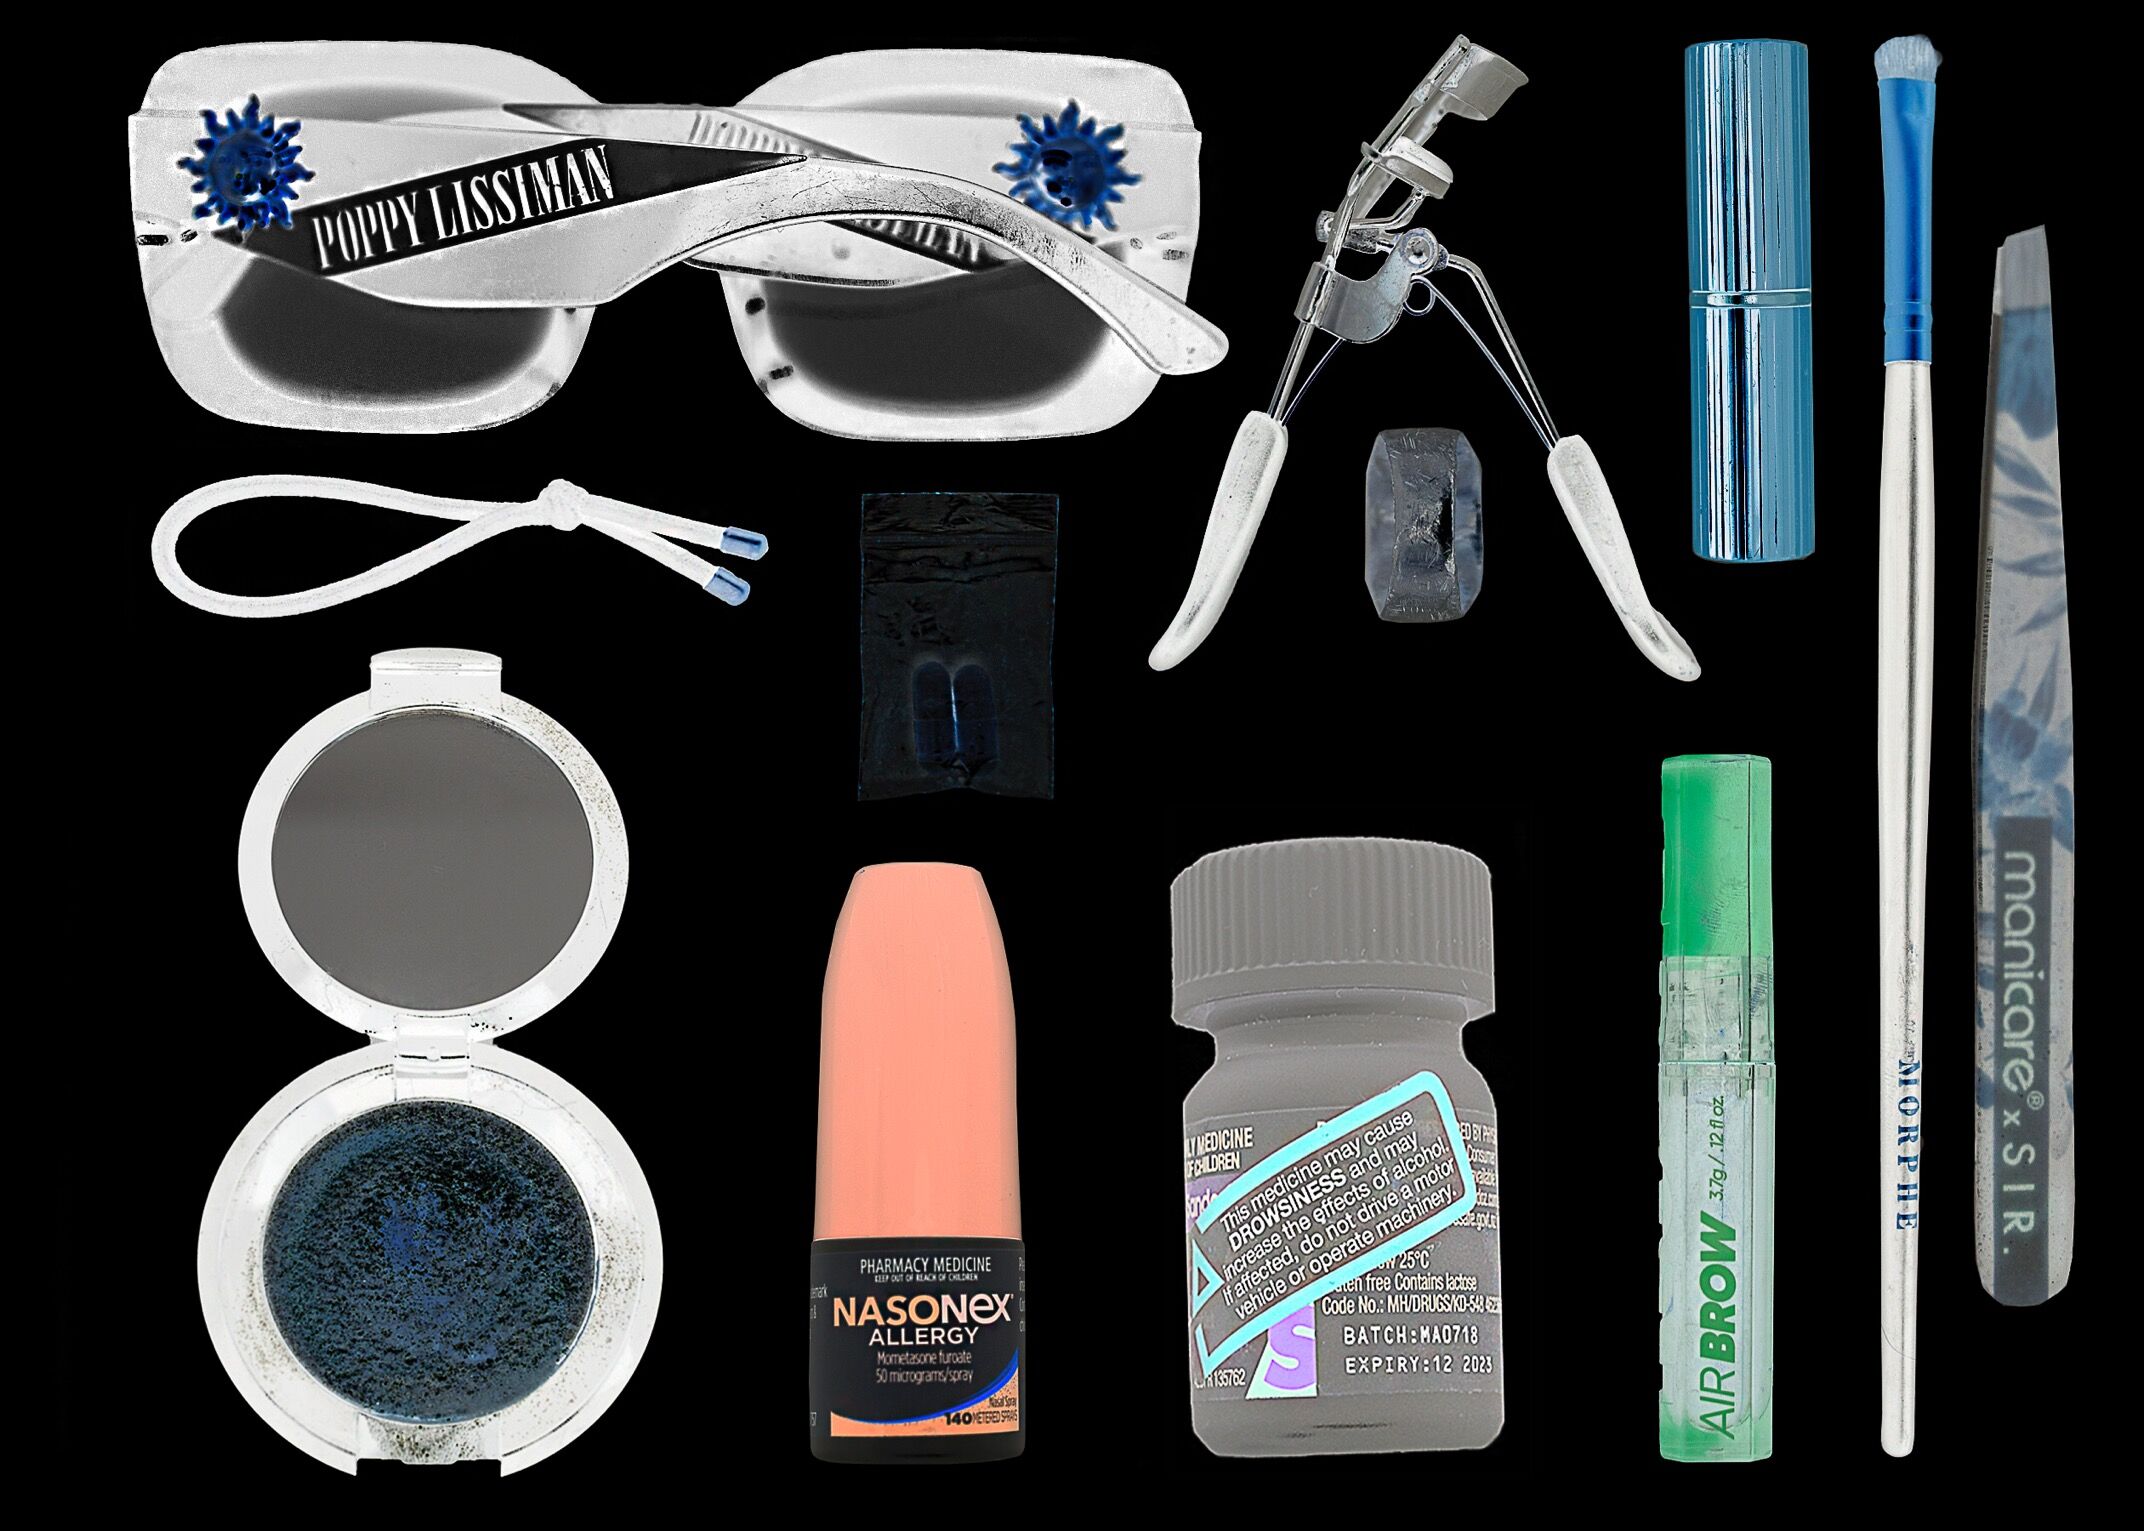 A collection of personal care items including decorated sunglasses, a compact mirror, and cosmetic tools, alongside medical items like a nasal spray and prescription bottles.